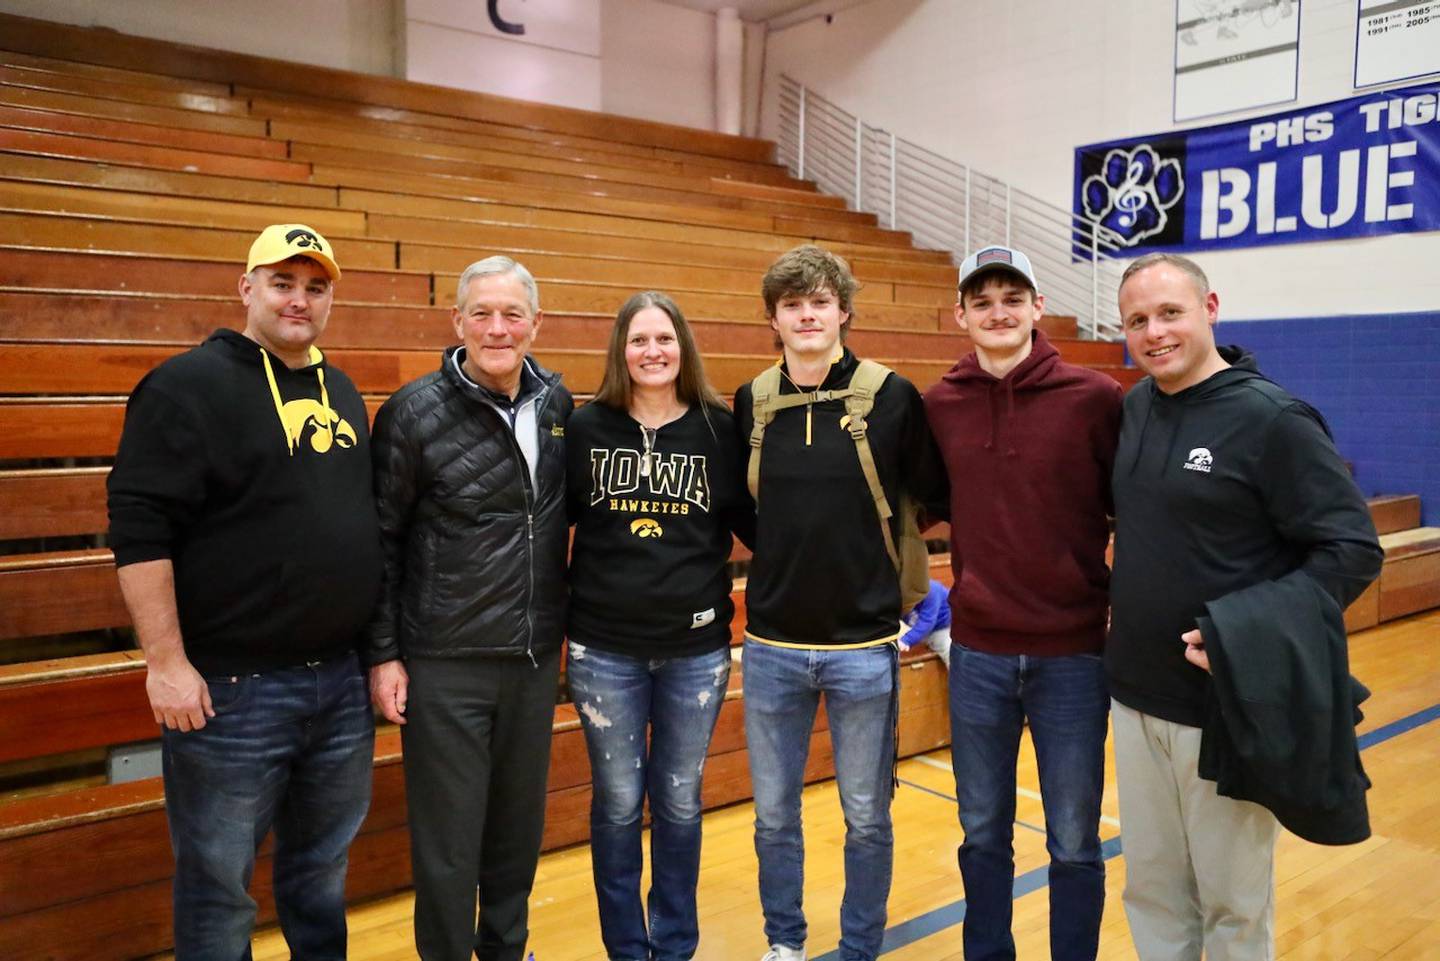 Iowa Hawkeye football coaches Kirk Ferentz and Seth Wallace visit with Princeton's Teegan Davis and family after Tuesday's basketball game at Prouty Gym. Davis has signed to play football for the Hawkeyes this fall. Pictured are Spencer Davis, Ferentz, Annette  Davis, Teegan Davis, Cael Davis and Wallace.